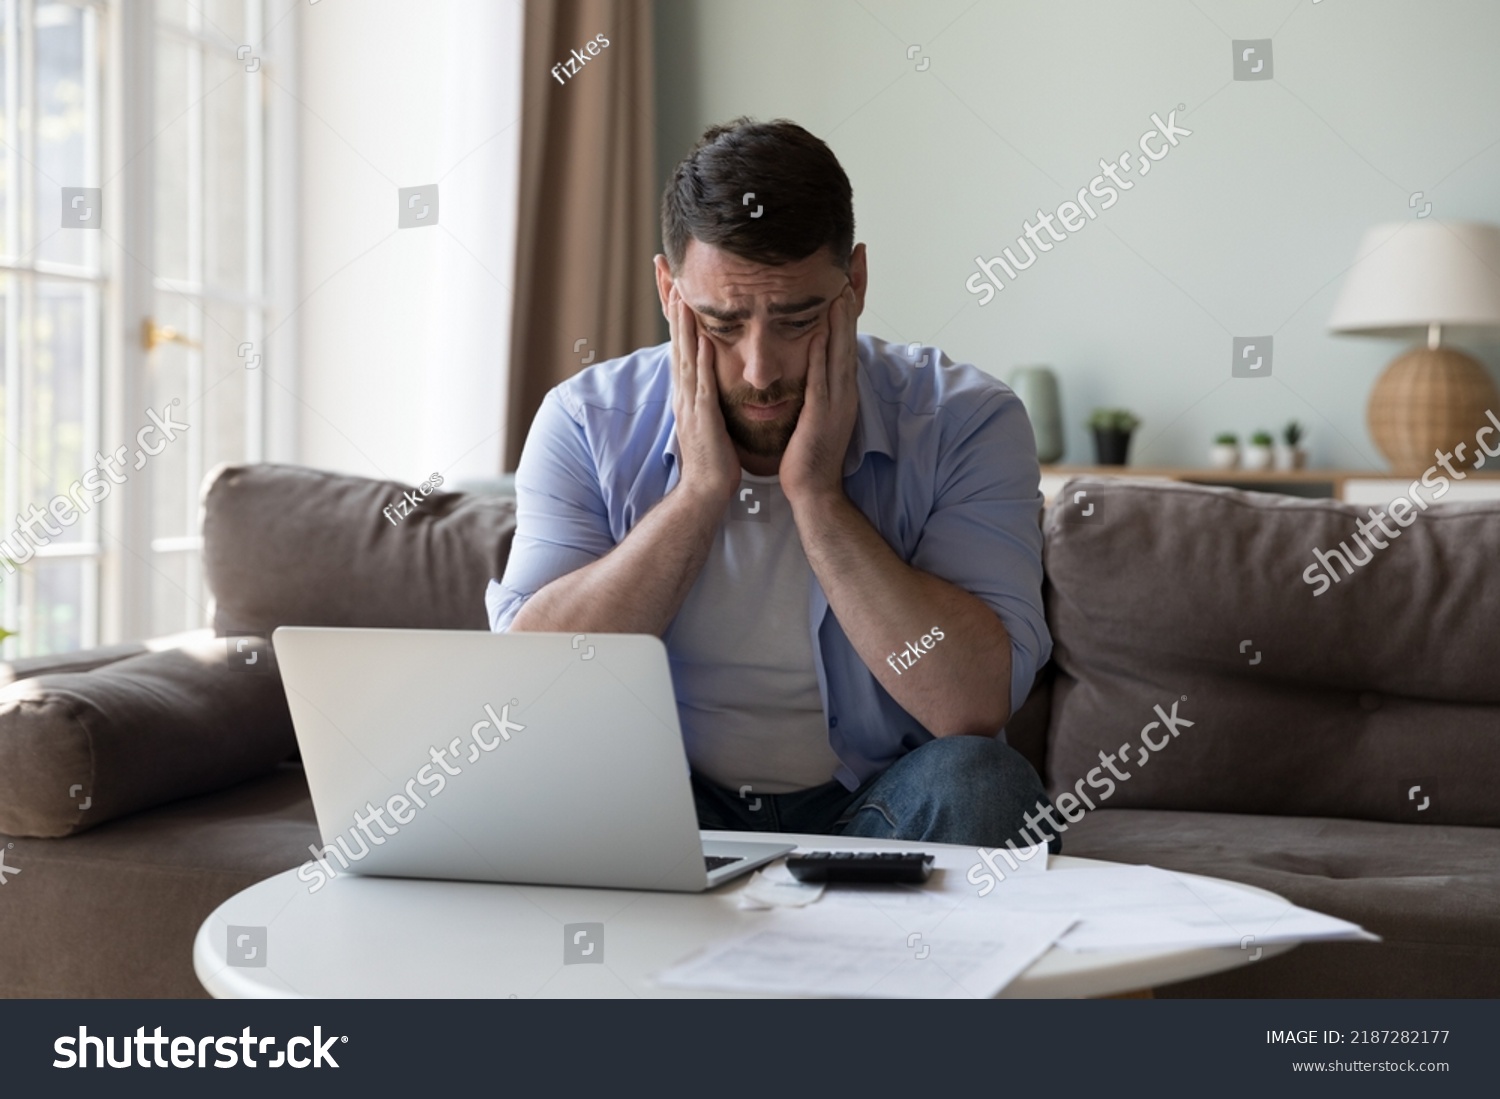 Millennial man counted income and expenses looks upset because of lack of funds for monthly mortgage payments feels desperate sit near heap of bills feels stressed. Financial failure, debts concept #2187282177